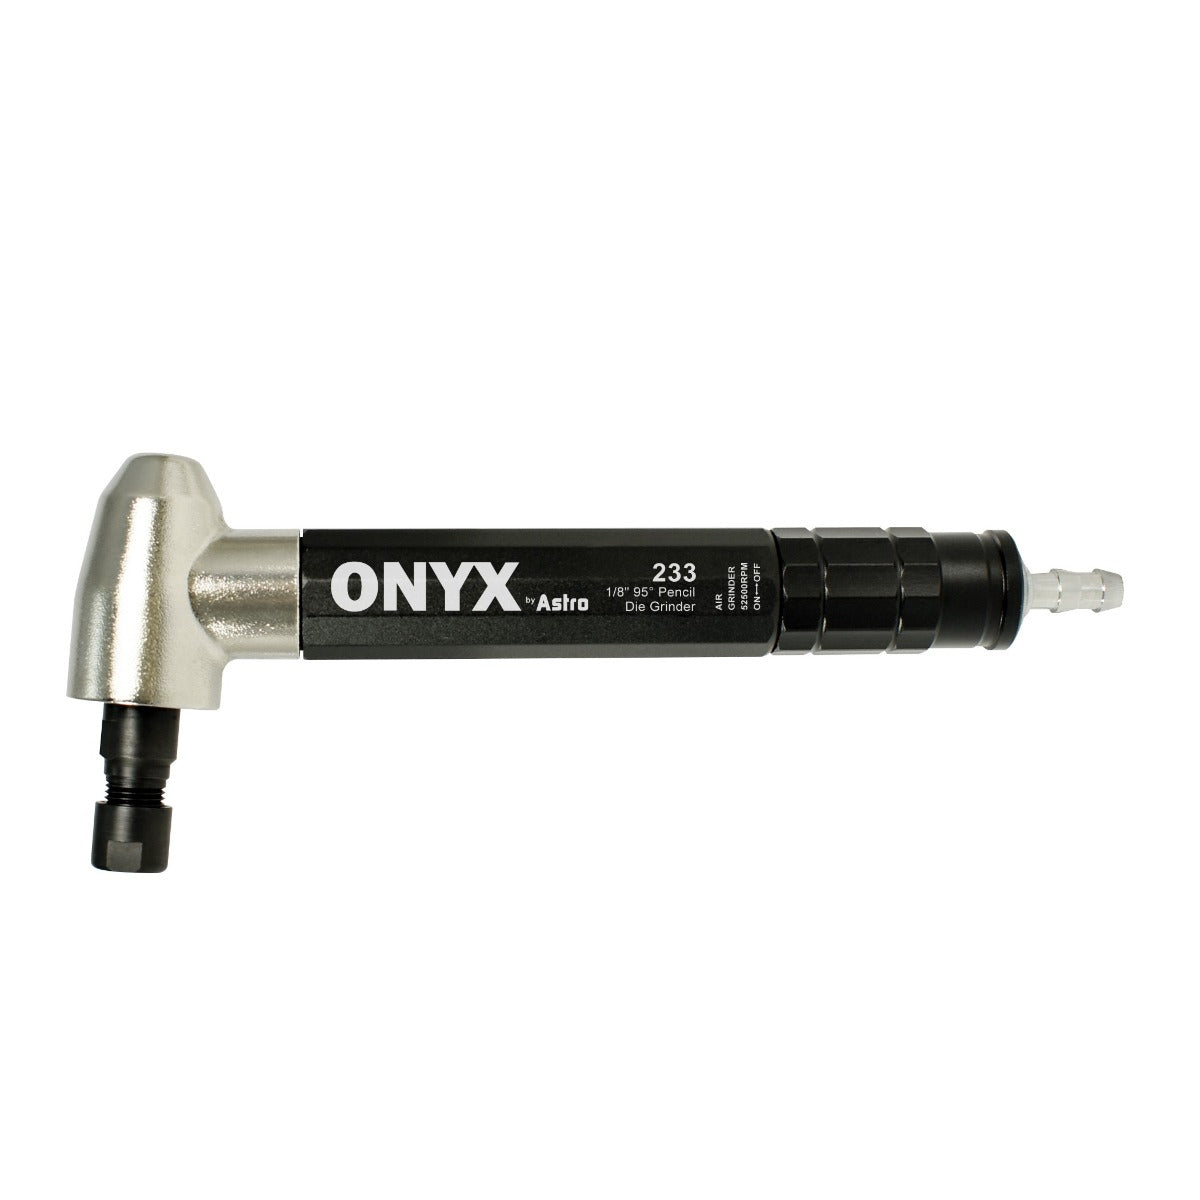 Astro Pneumatic 233 ONYX 1/8 95?????¬? Pencil Angle Die Grinder